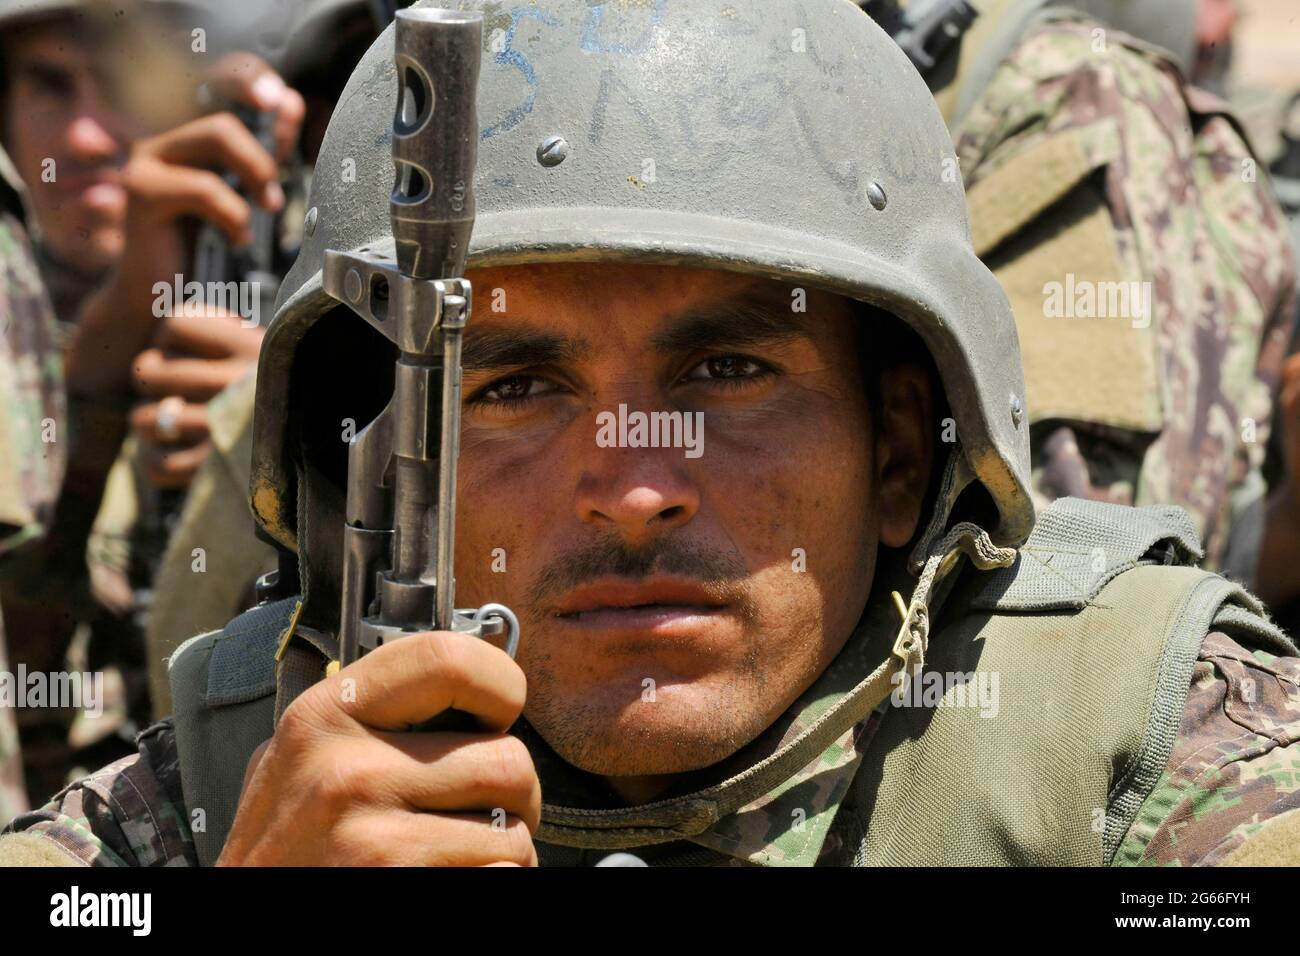 KABUL, AFGHANISTAN Kabul - 11 June 2018 - An Afghan National Army Territorial Force soldier watches security demonstrations during a military exercise Stock Photo